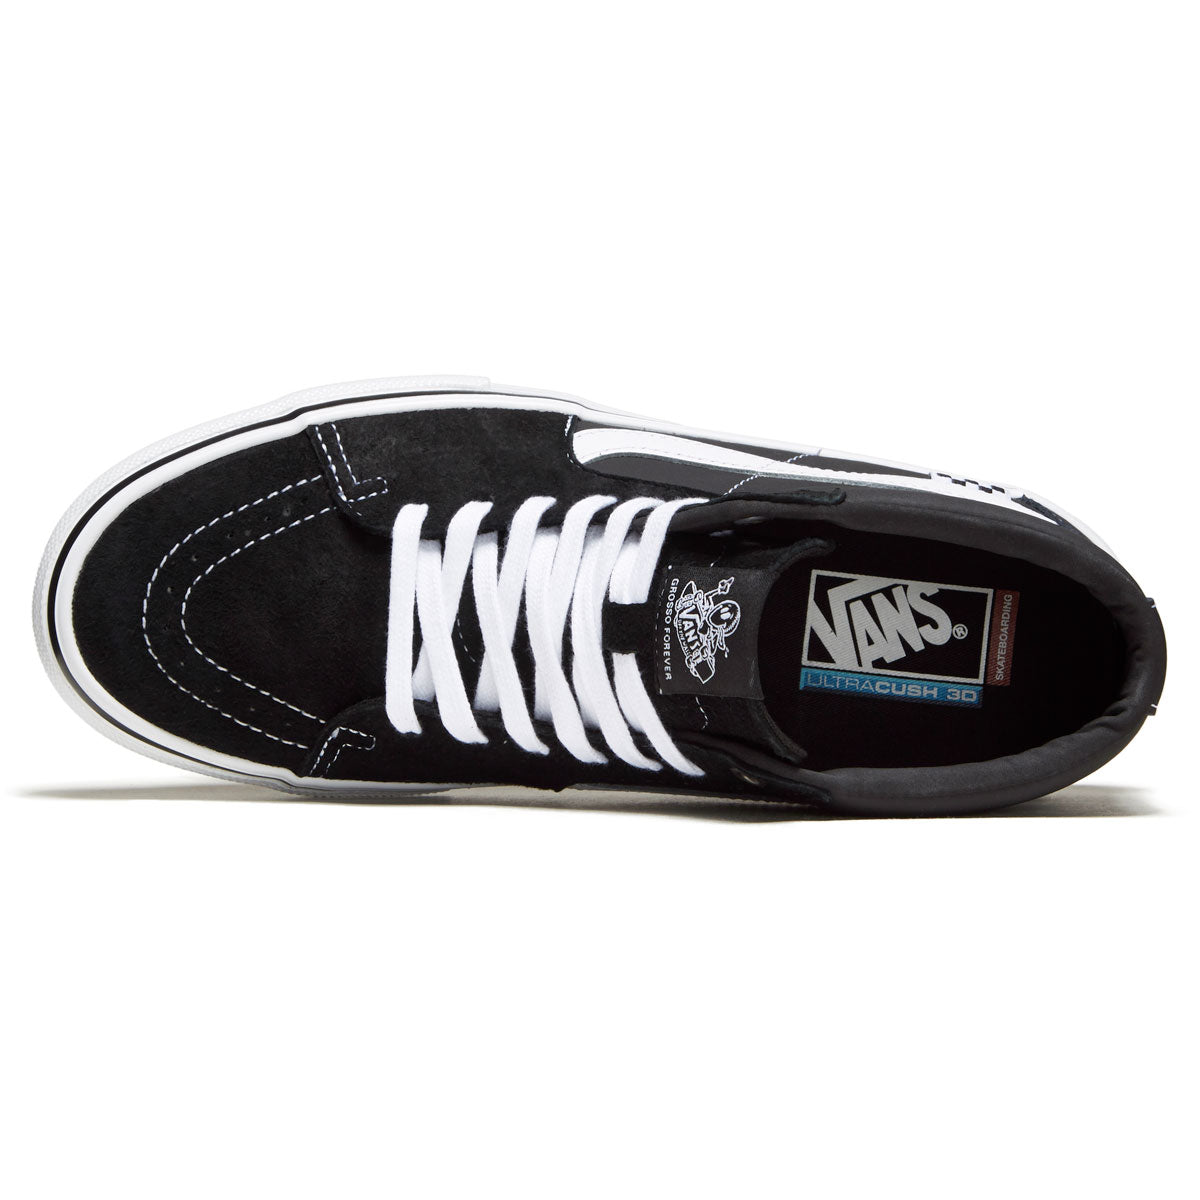 Vans Grosso Sk8 Mid Shoes - Black/White/Emo Leather image 3